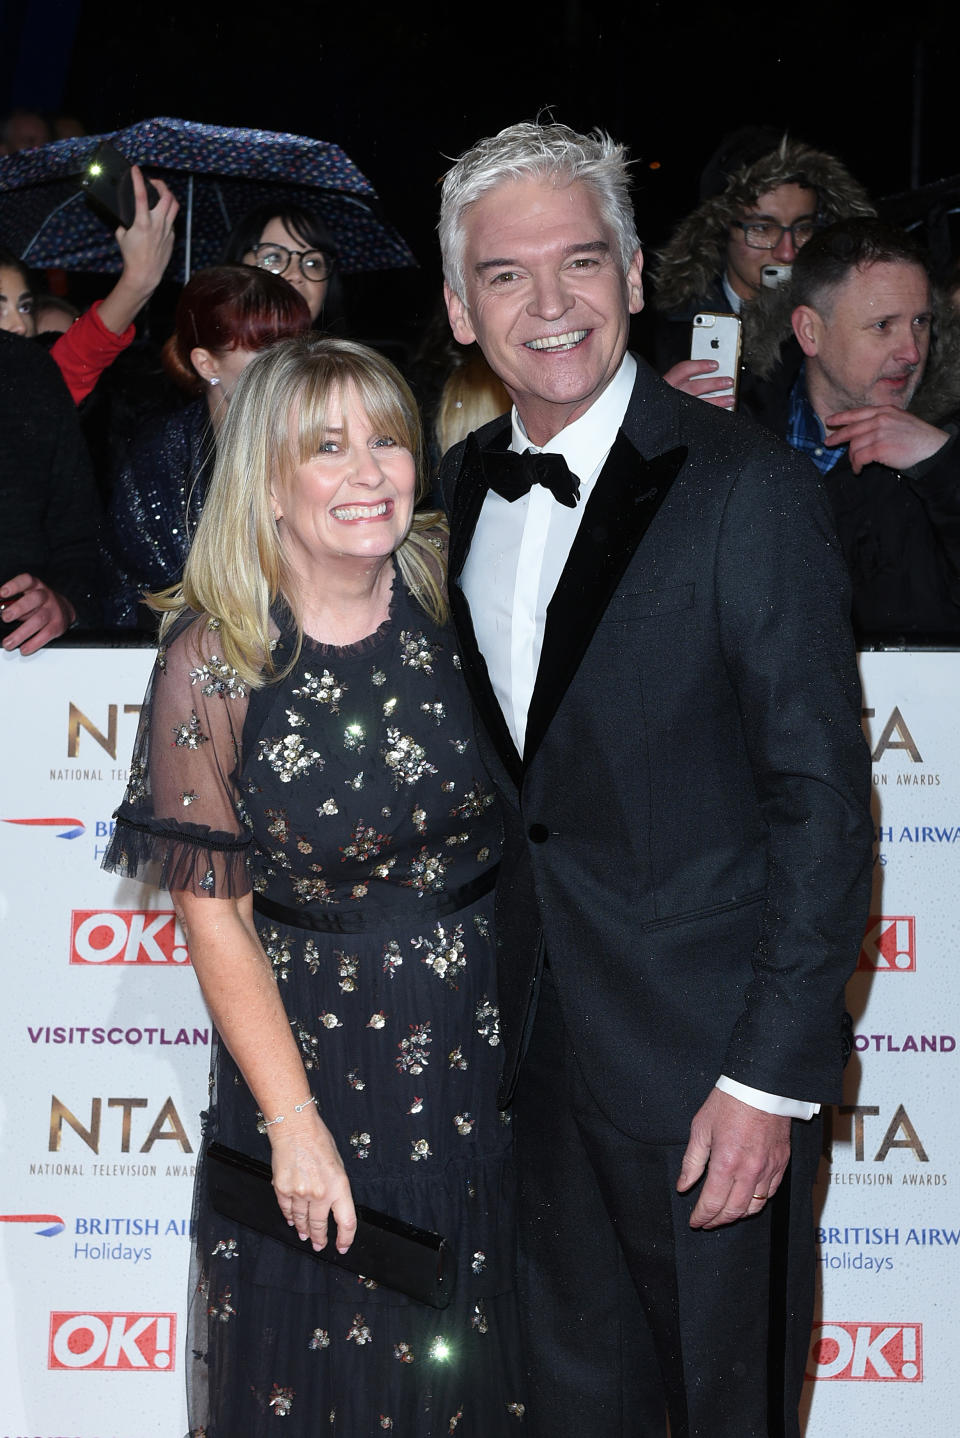 Phillip Schofield and his wife, Stephanie Lowe, at the National Television Awards in January 2019. (Photo by Joe Maher/WireImage)